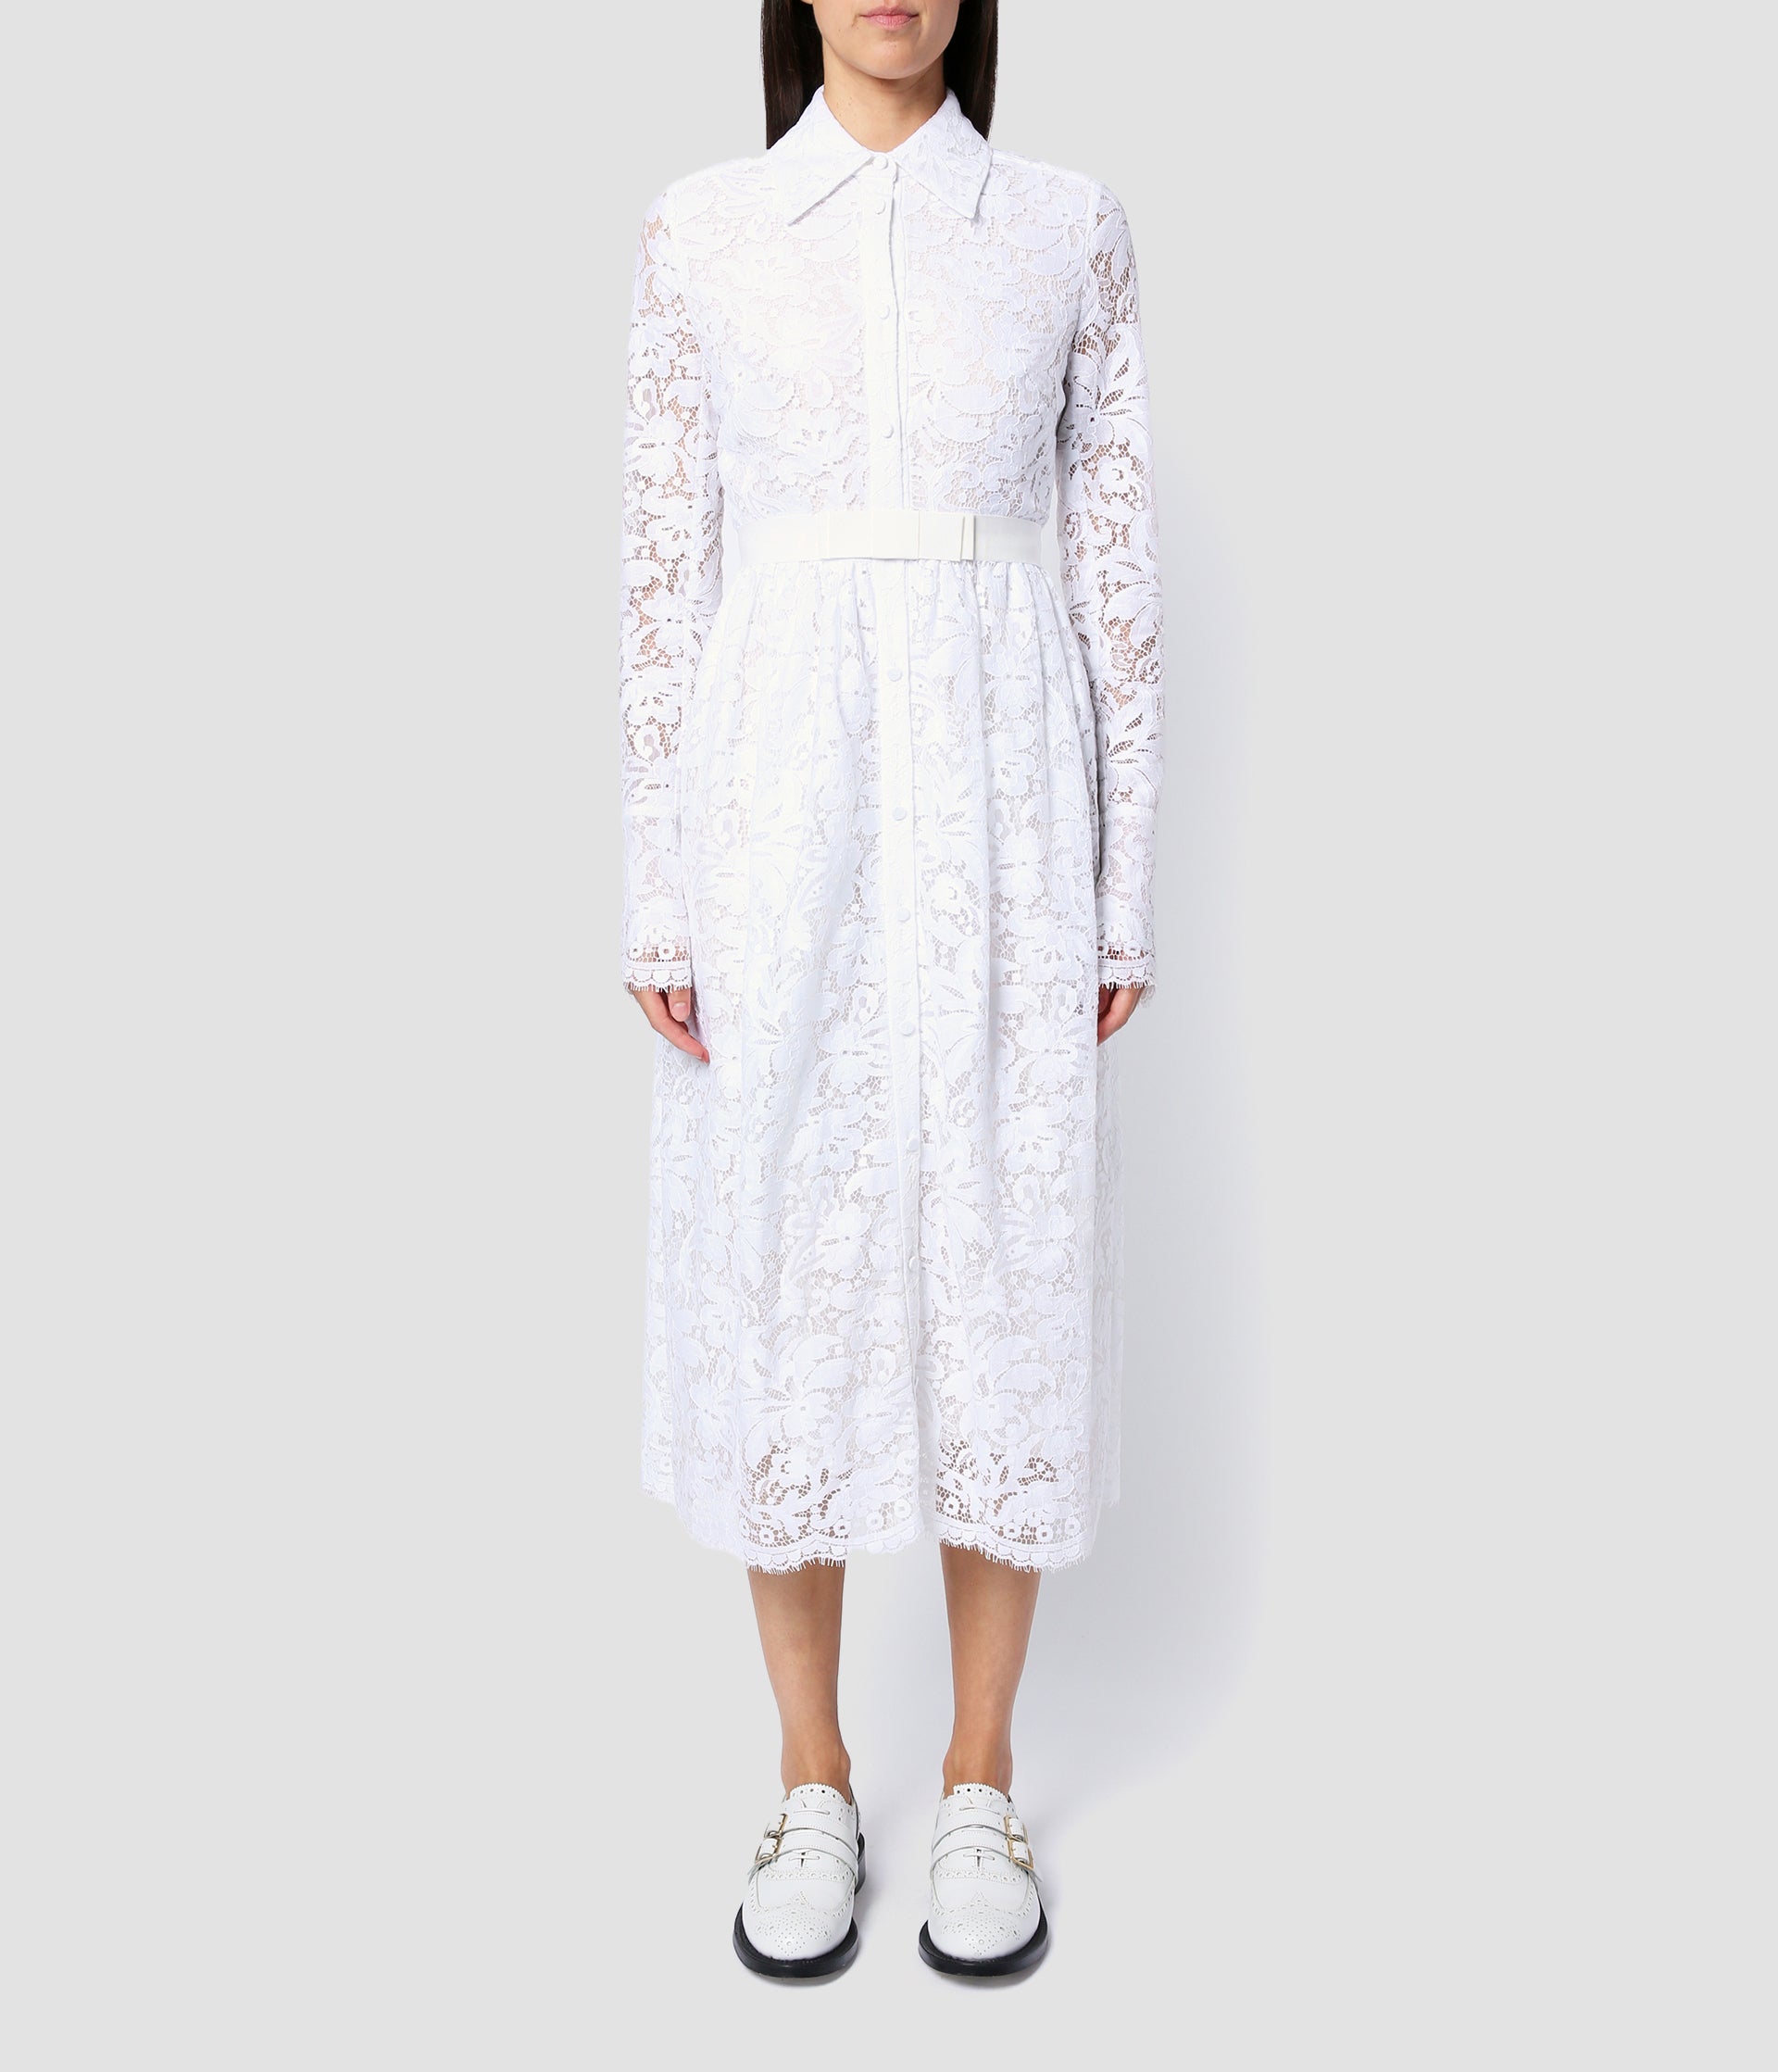 The Corinne dress  by designer ERDEM is a long sleeve lace shirt dress with a collar and nipped in waist. In white ivory lace, it's the perfect option for a relaxed wedding or reception dress. 